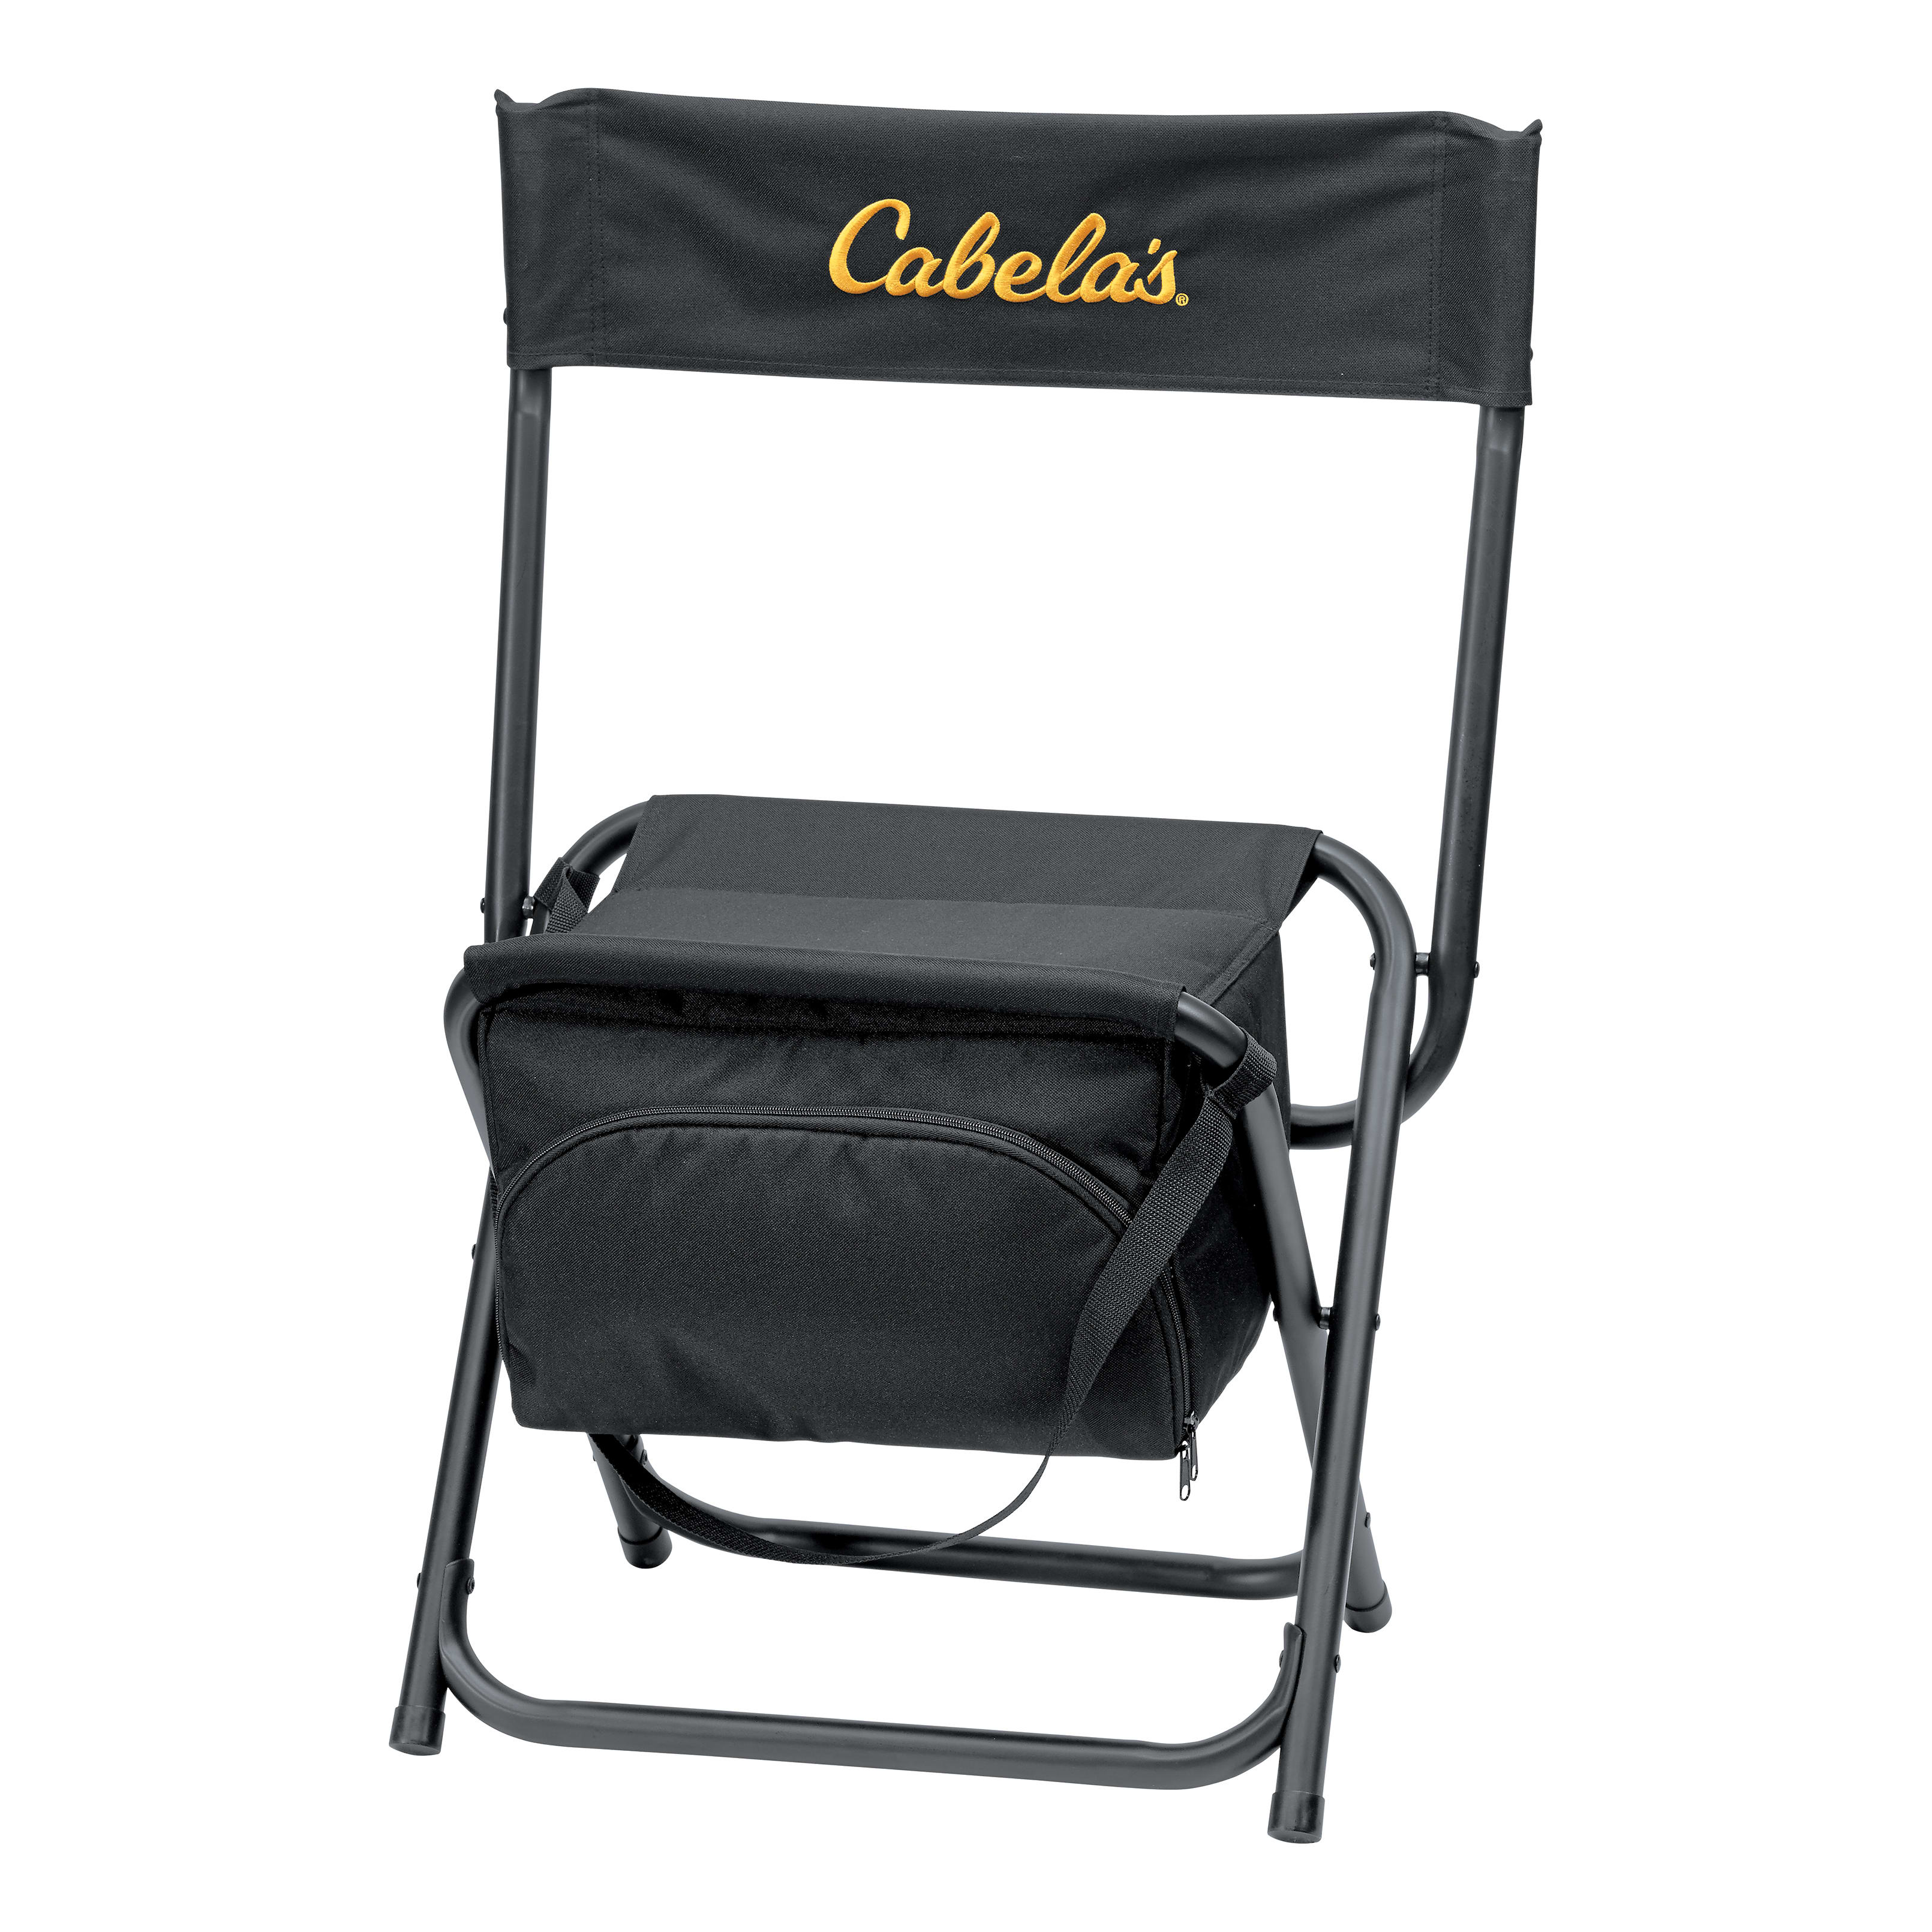 Cabela's Deluxe Ice Chair